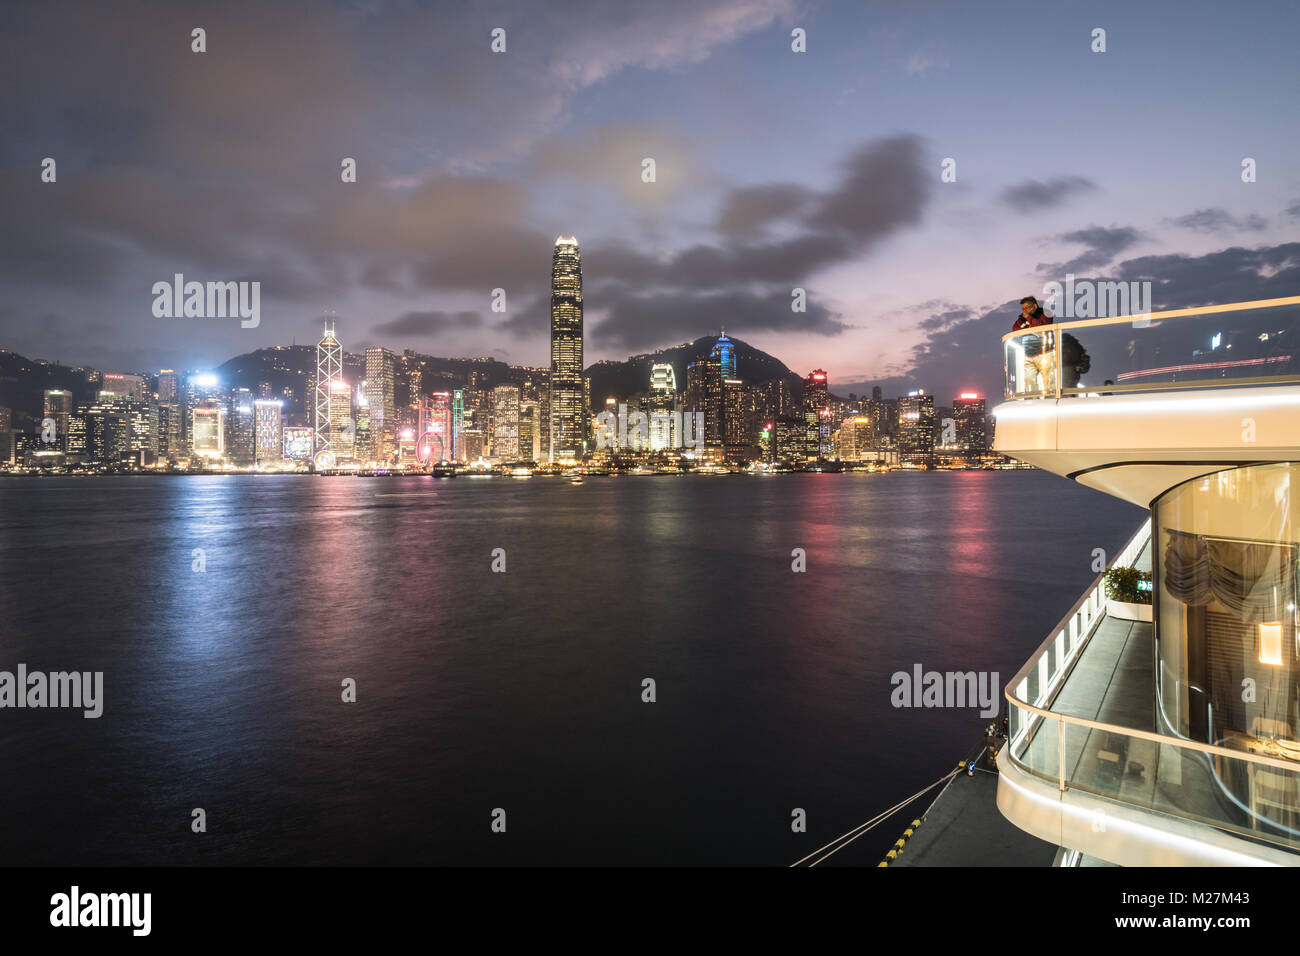 Hong Kong - January 25 2018: The viewing platform on the top of the Ocean cruise terminal in Kowloon with the Hong Kong island famous skyline at night Stock Photo